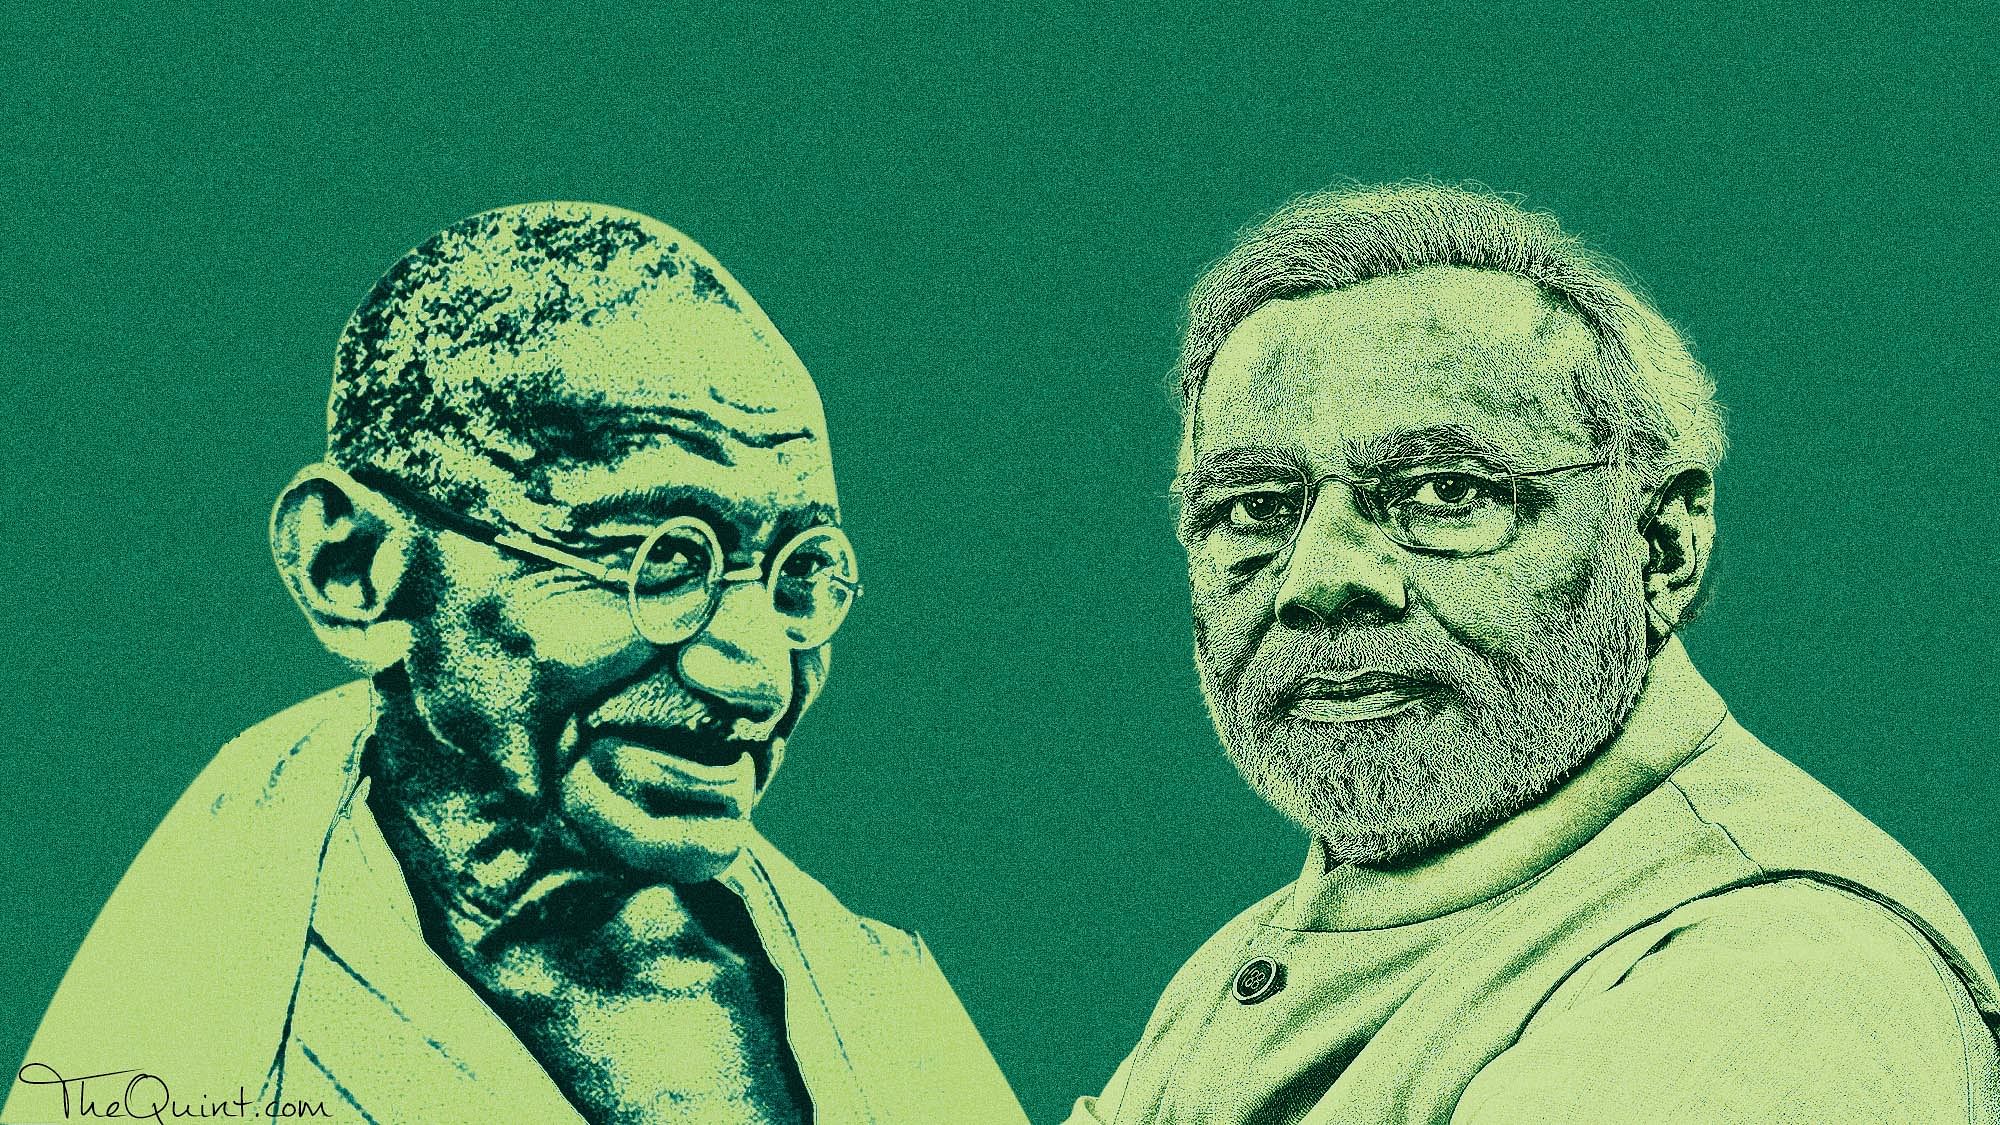 Even as PM Modi invokes the Mahatma to warn cow vigilantes, there is a stark difference between their brand of politics. (Photo: Rhythum Seth/<b>The Quint</b>)